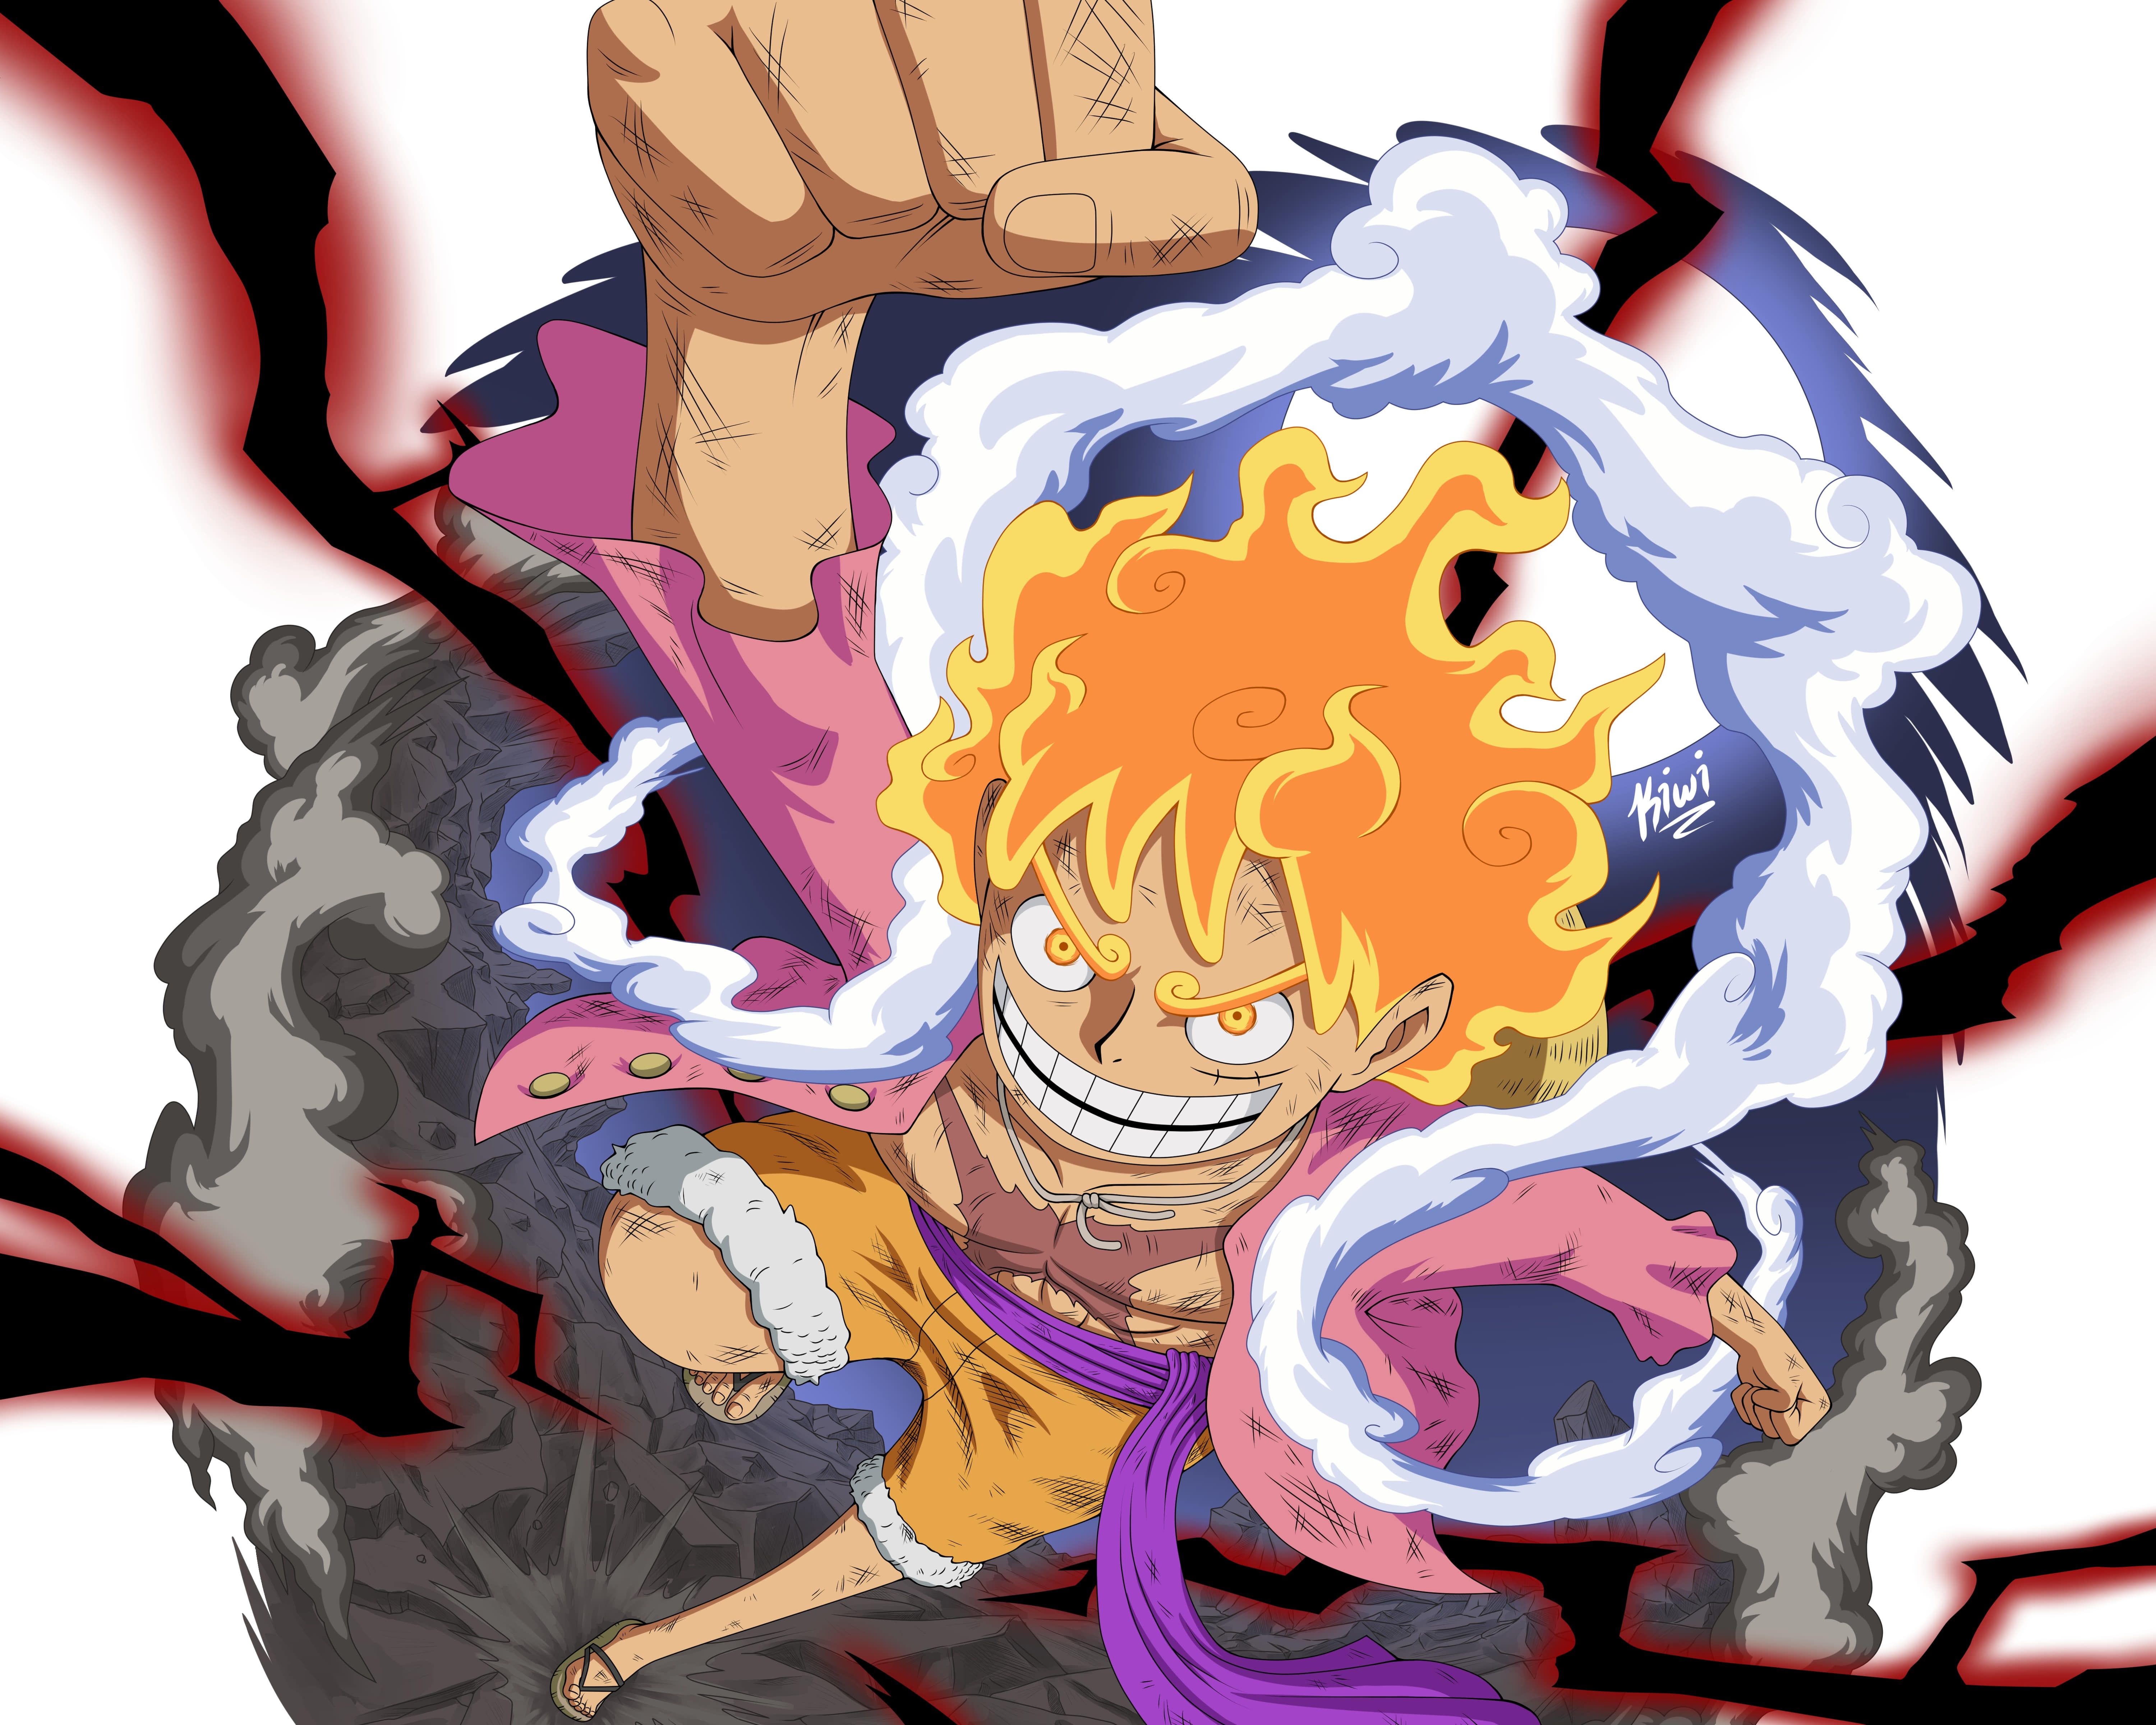 1507 anh luffy gear 5 one piece chat luong cao3